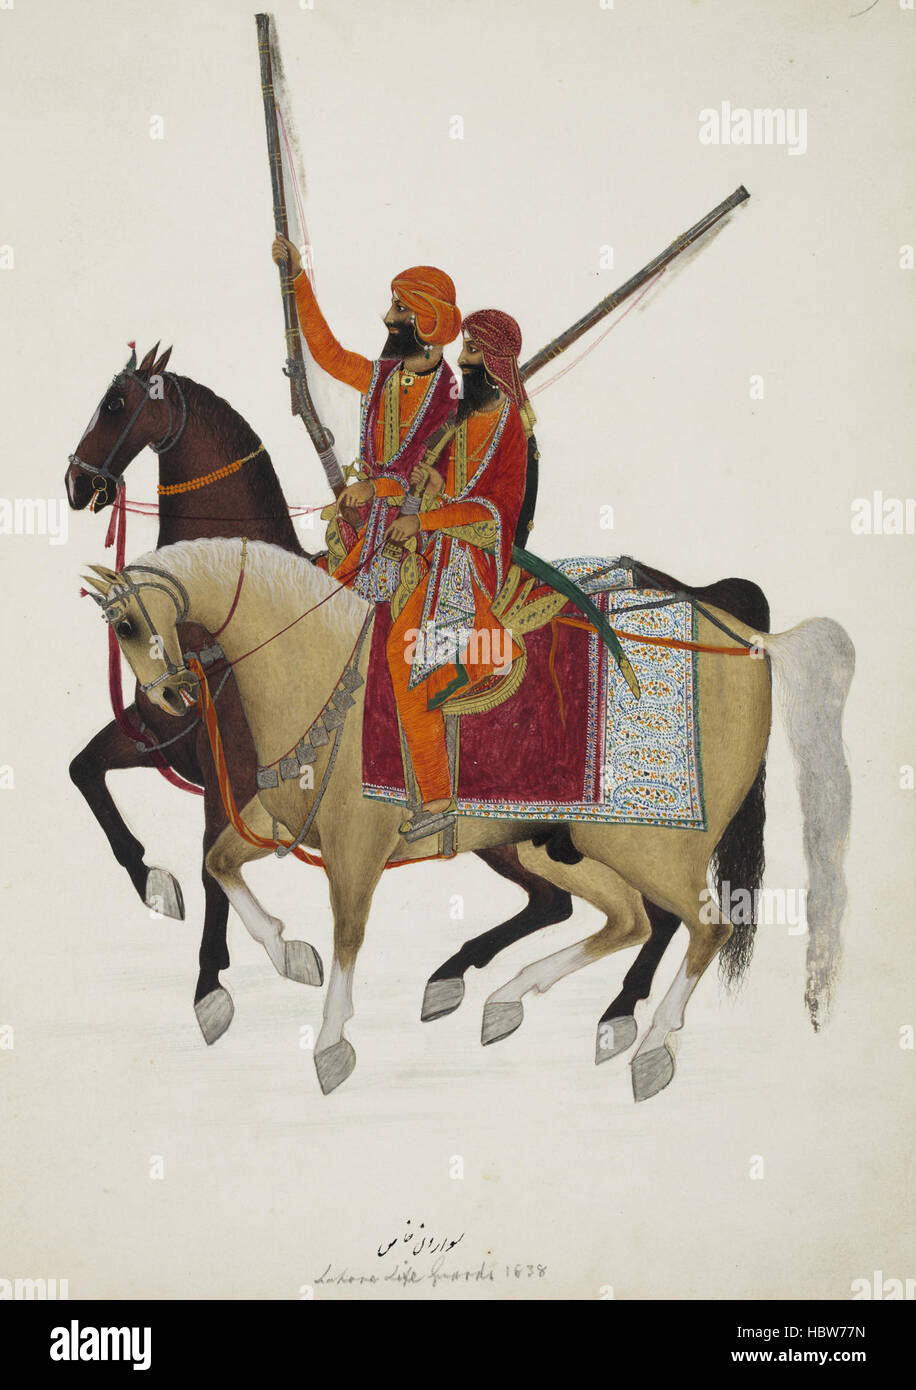 Untitled - caption: 'Bodyguard of Ranjit Singh. Two horsemen on richly caparisoned mounts. Inscribed in Persian characters: 'Sawardan i khass'; in English 'Lahore Life Guards 1838'' Untitled - caption 'Bodyguard of Ranjit Singh Two horsemen on Stock Photo